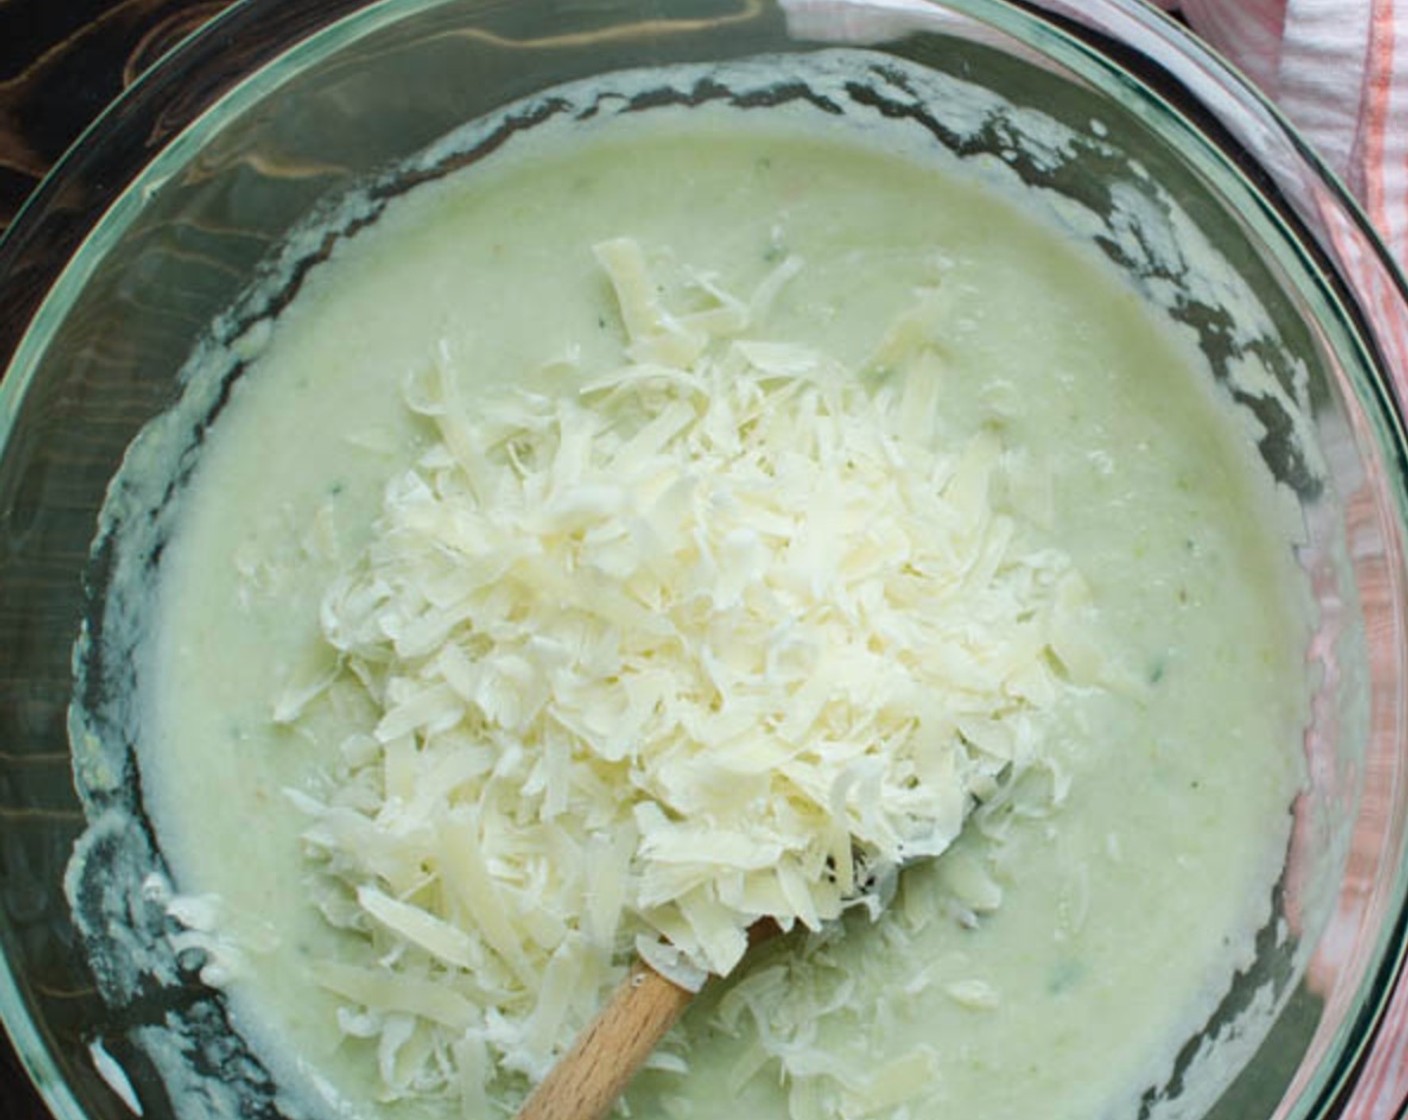 step 8 Stir in the chopped Fresh Thyme (1 tsp) and shredded Gruyère Cheese (1 cup). Add the béchamel sauce to the puree and stir to combine.